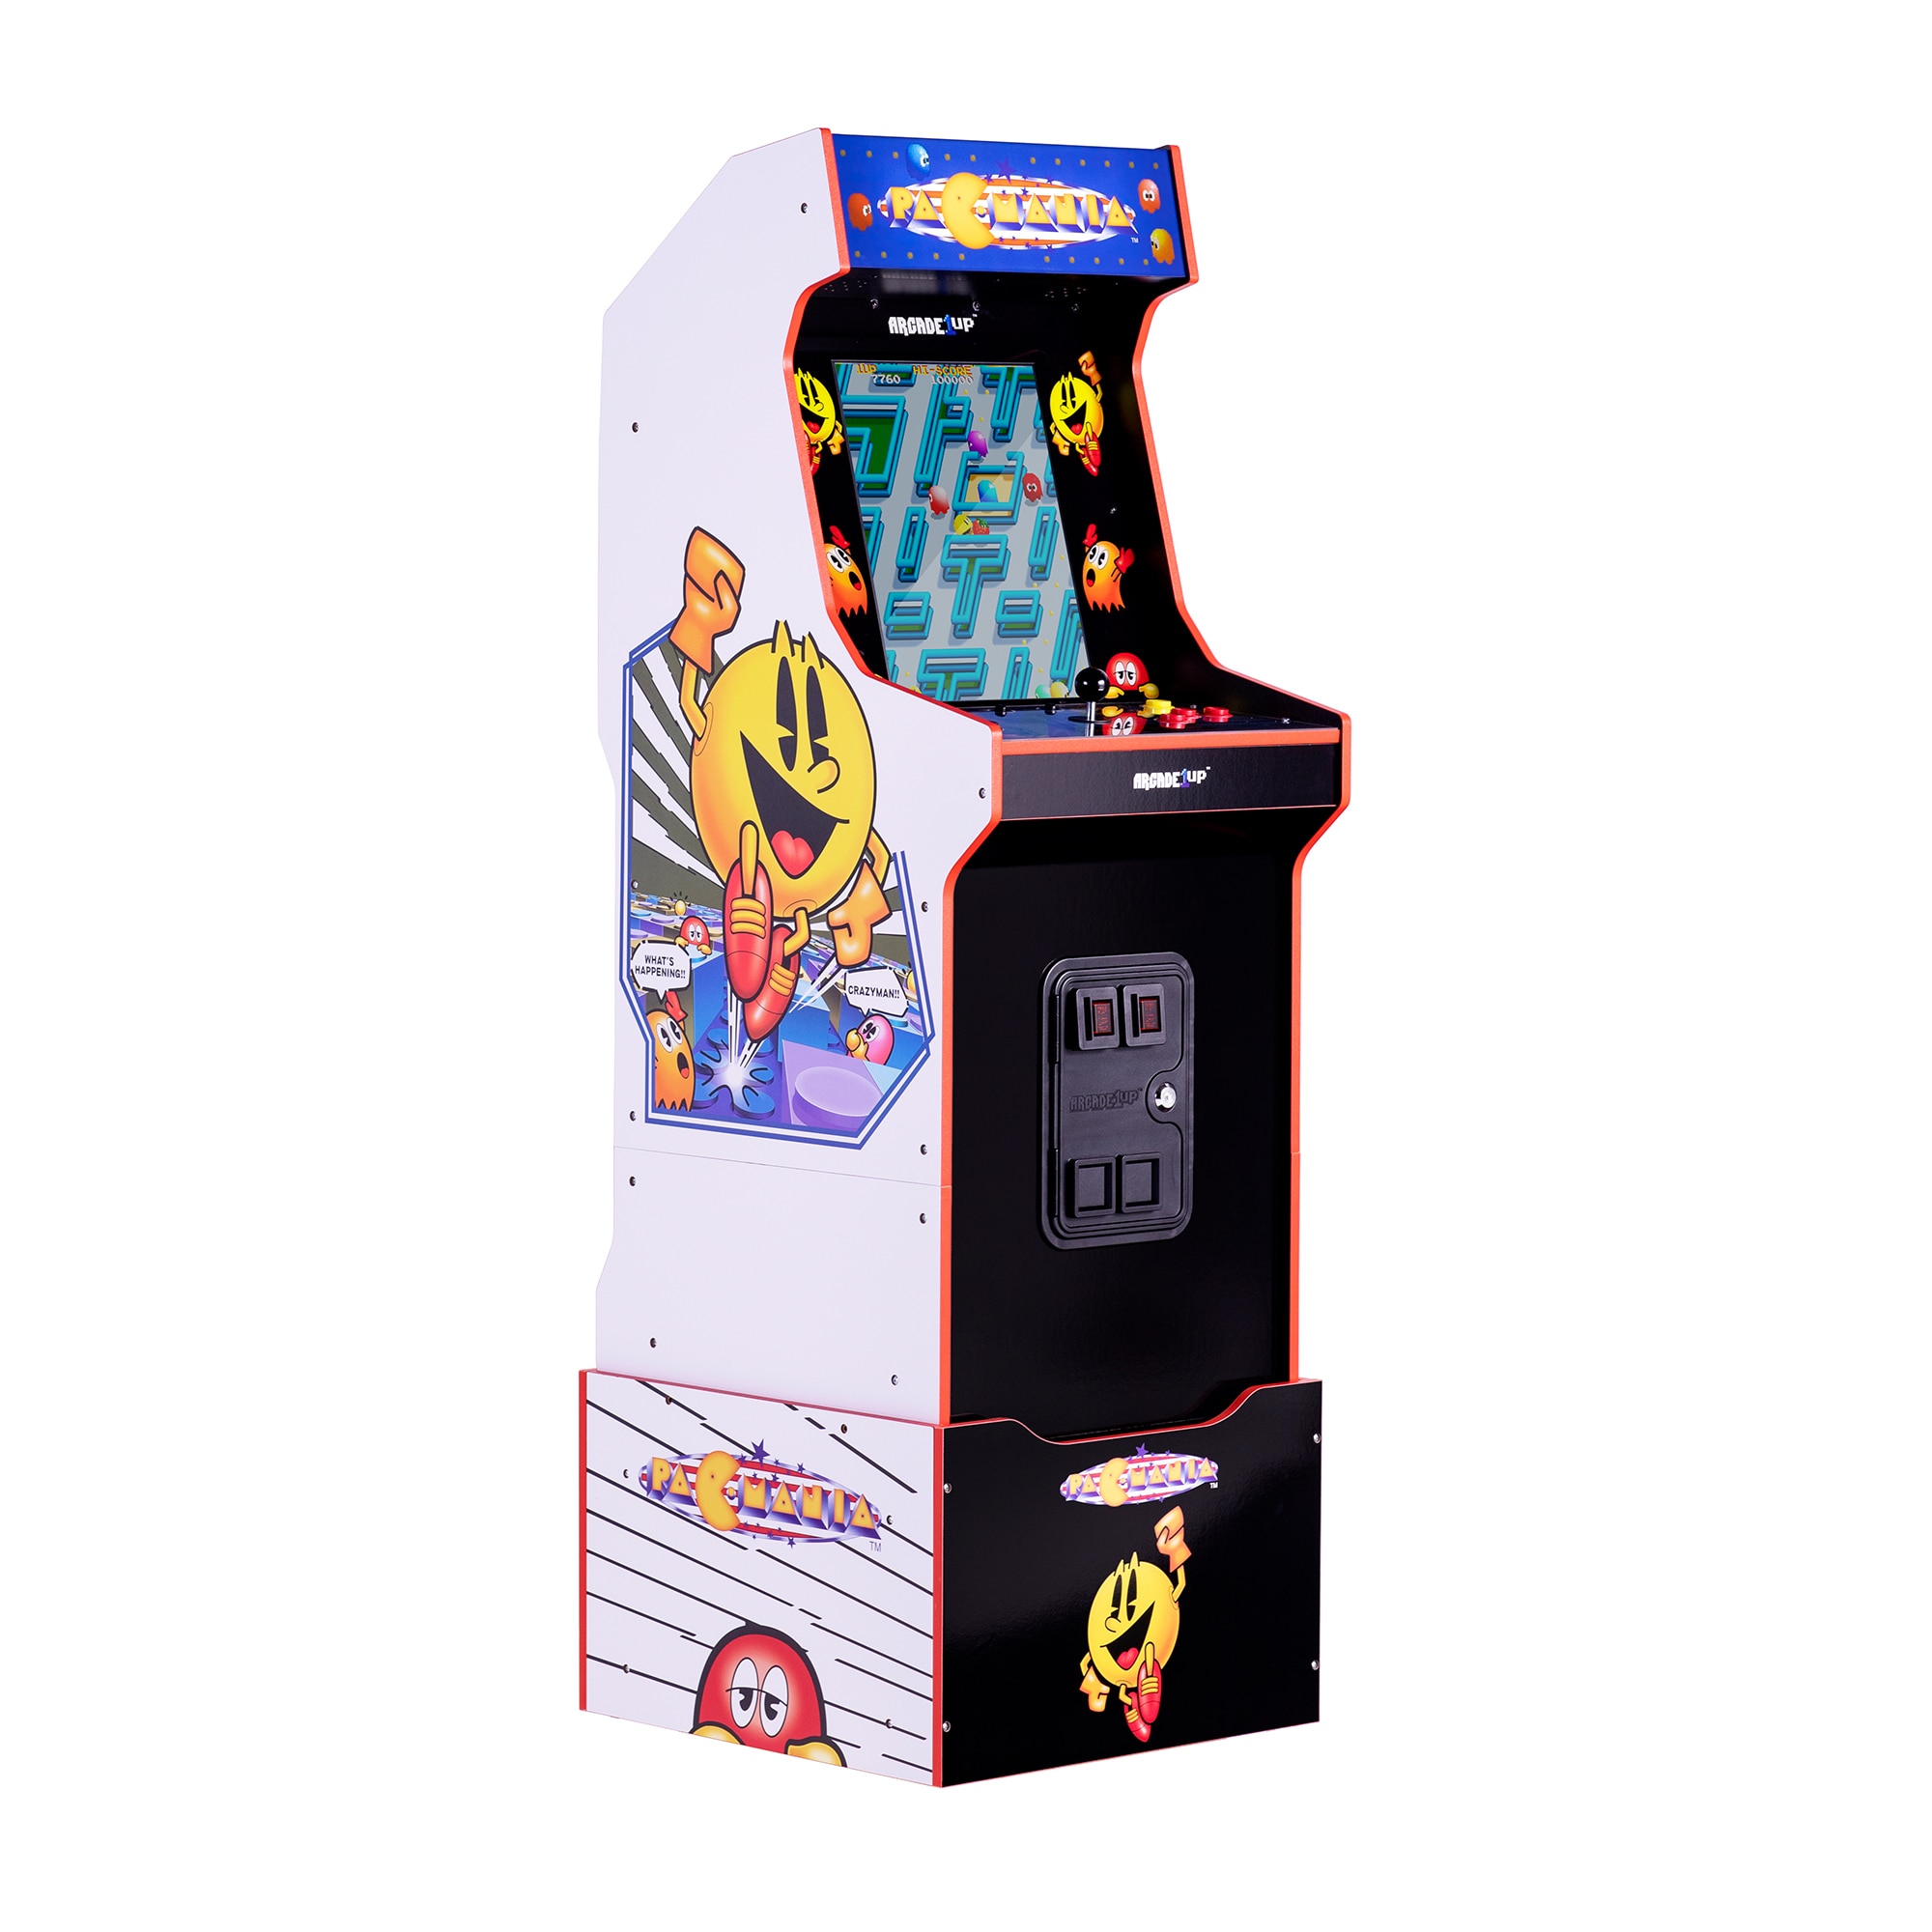 Wholesale Crazy Fruit Slot Game Video Arcade Game Machines with